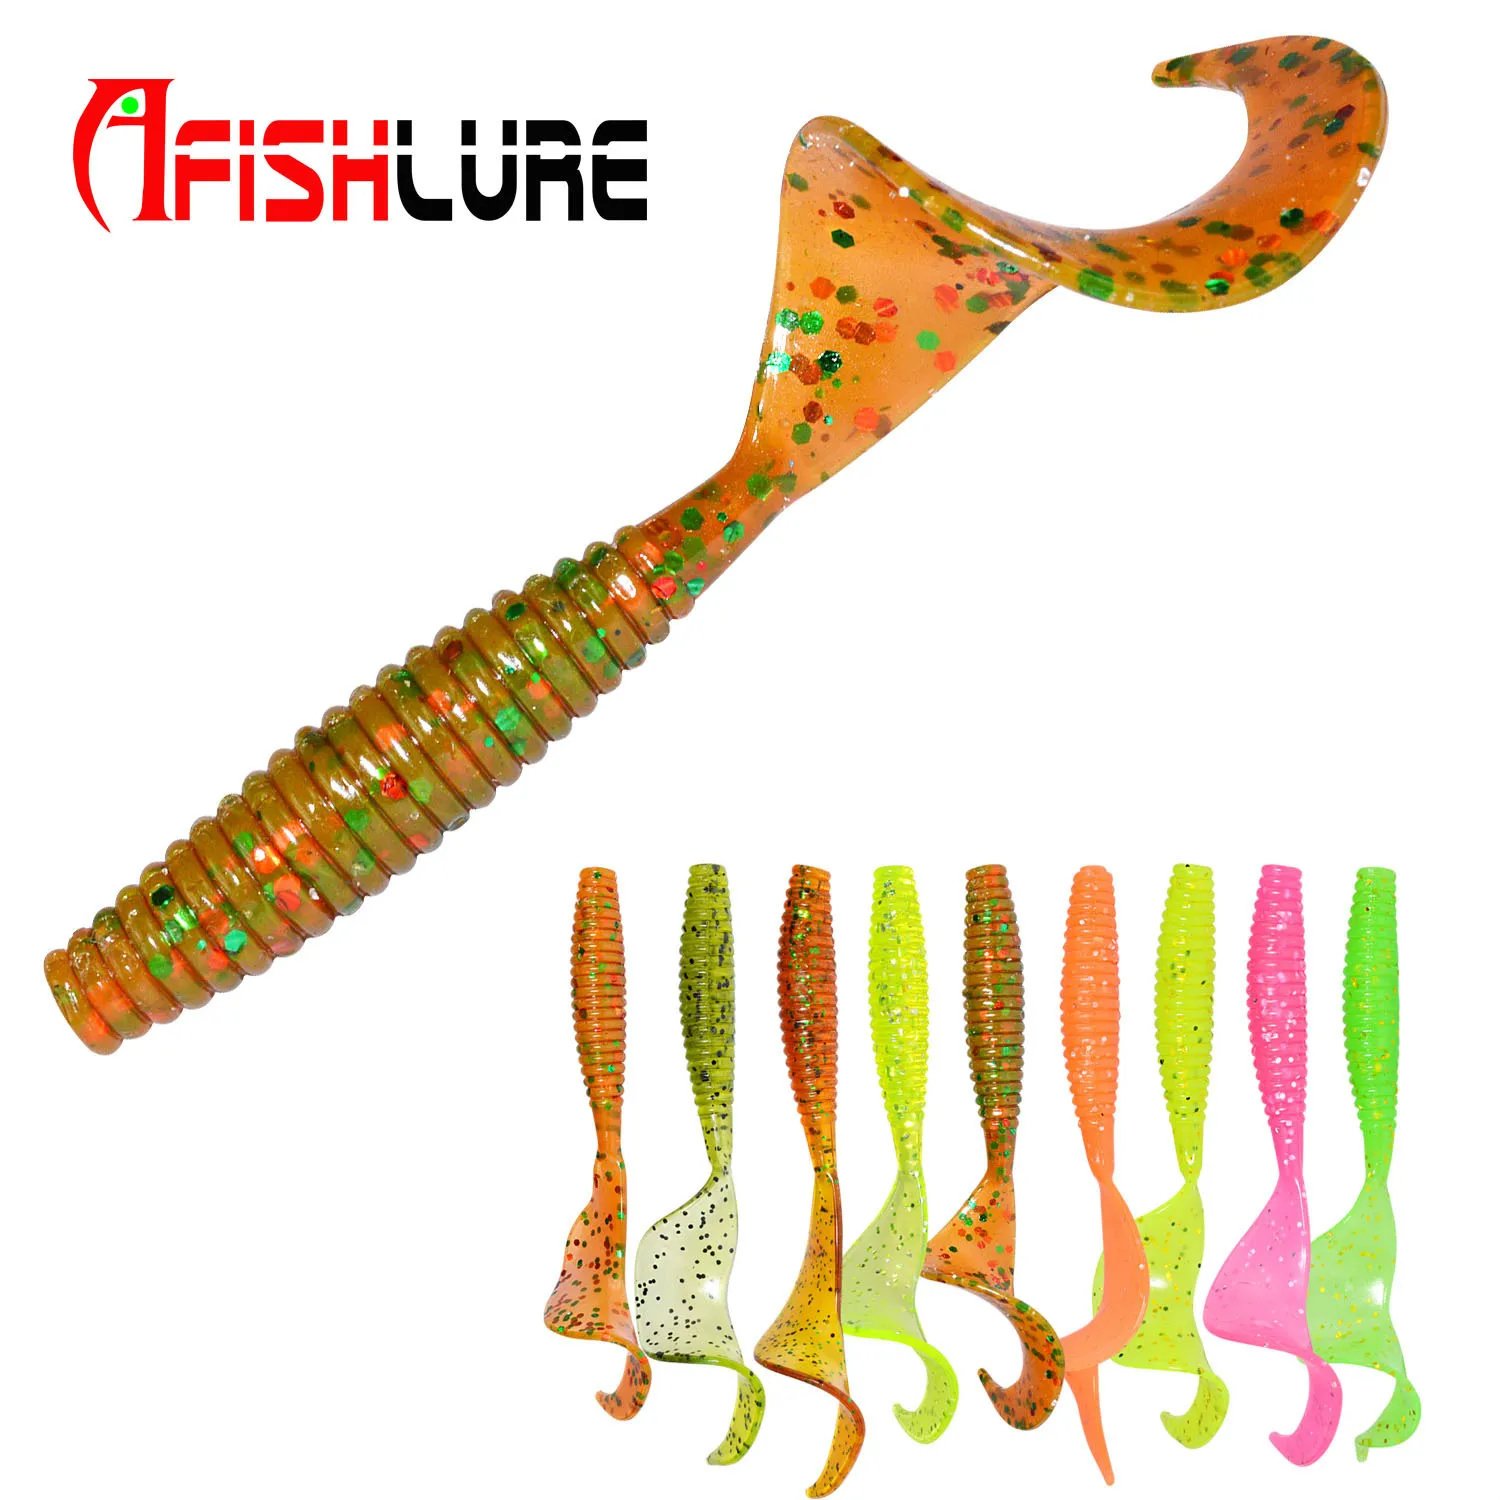 Afishlure Soft Plastic Fishing Perch Grubs Lure Rig 70mm 2g Curly Soft Lure Silicon Tail Maggot 10pcs/lot Bait